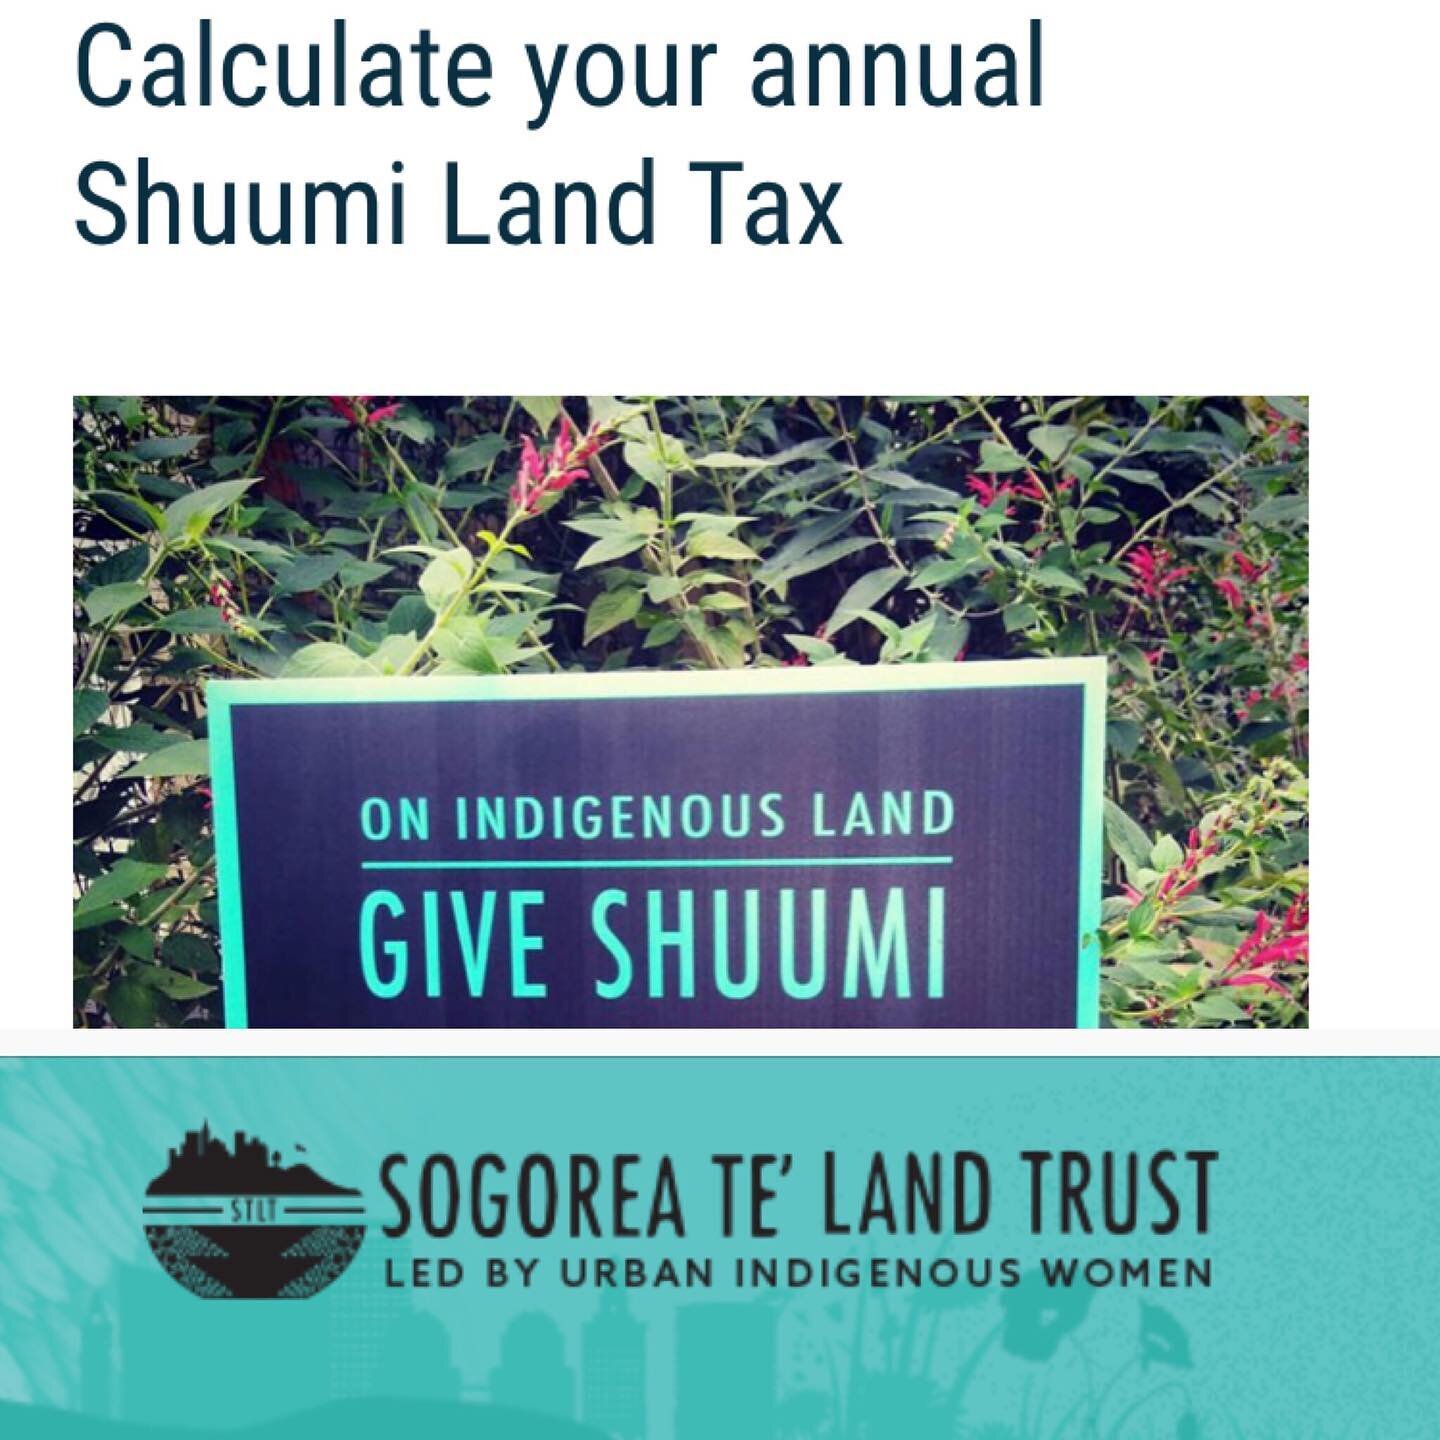 Highly recommend donating a land tax to @sogoreatelandtrust - a woman-run Ohlone organization trying to reclaim some ancestral land for their community, &amp; to keep their culture alive.